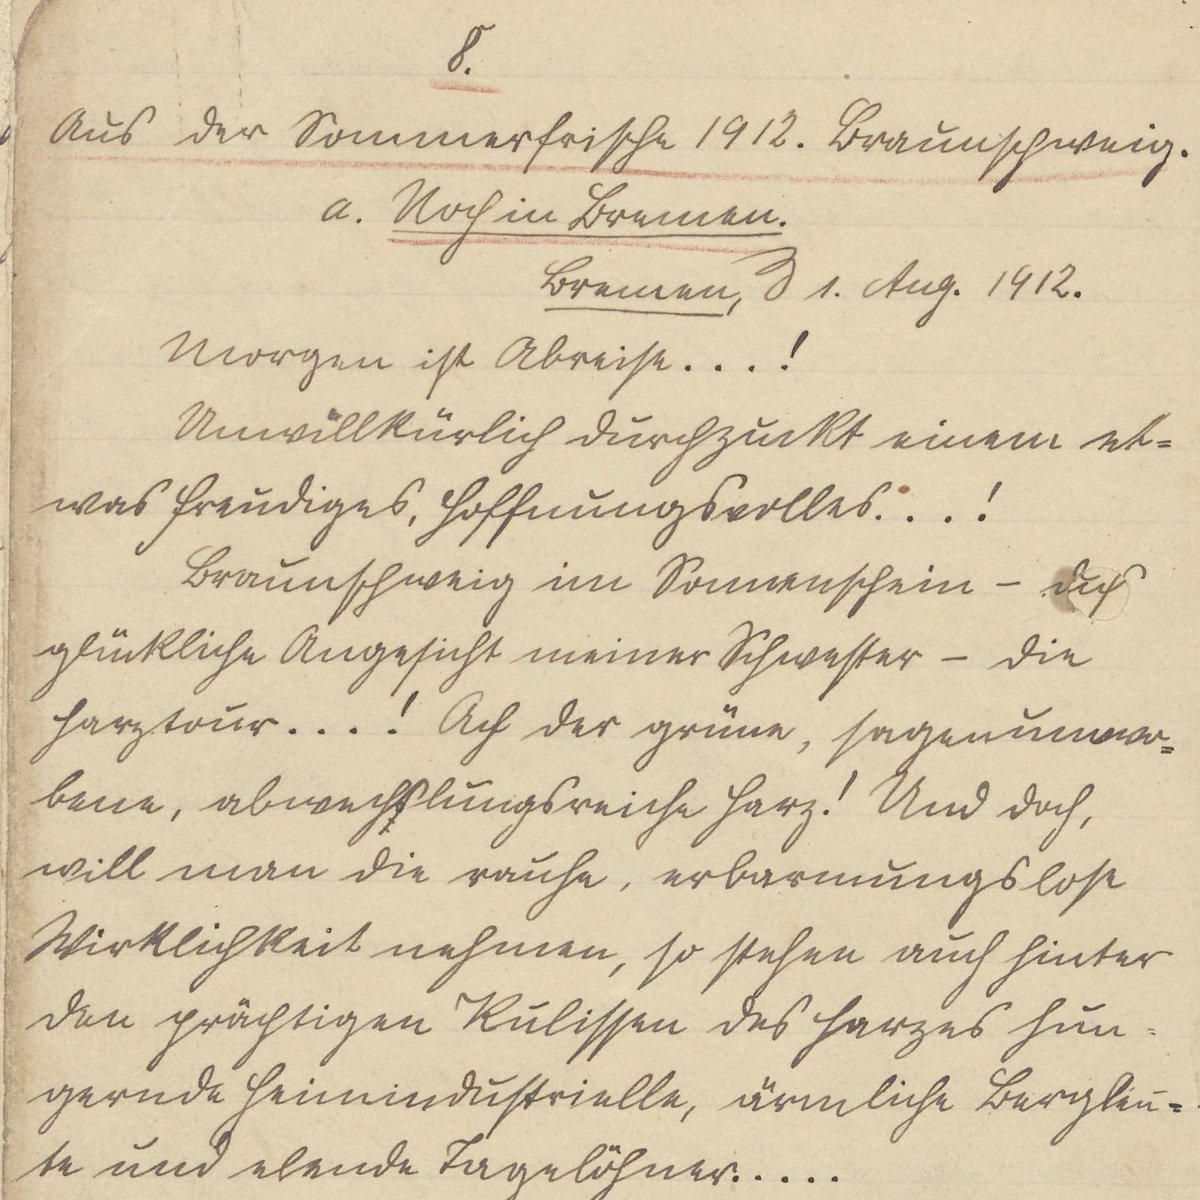 Thanks to the cooperative that runs @Transkribus for their scholarship! It will be a great help in transcribing Wilhelm Eildermann's handwritten notebooks (in Kurrentschrift!) from 1912-1918! 📔💻 AI can be useful, especially when it's not just driven by profit.